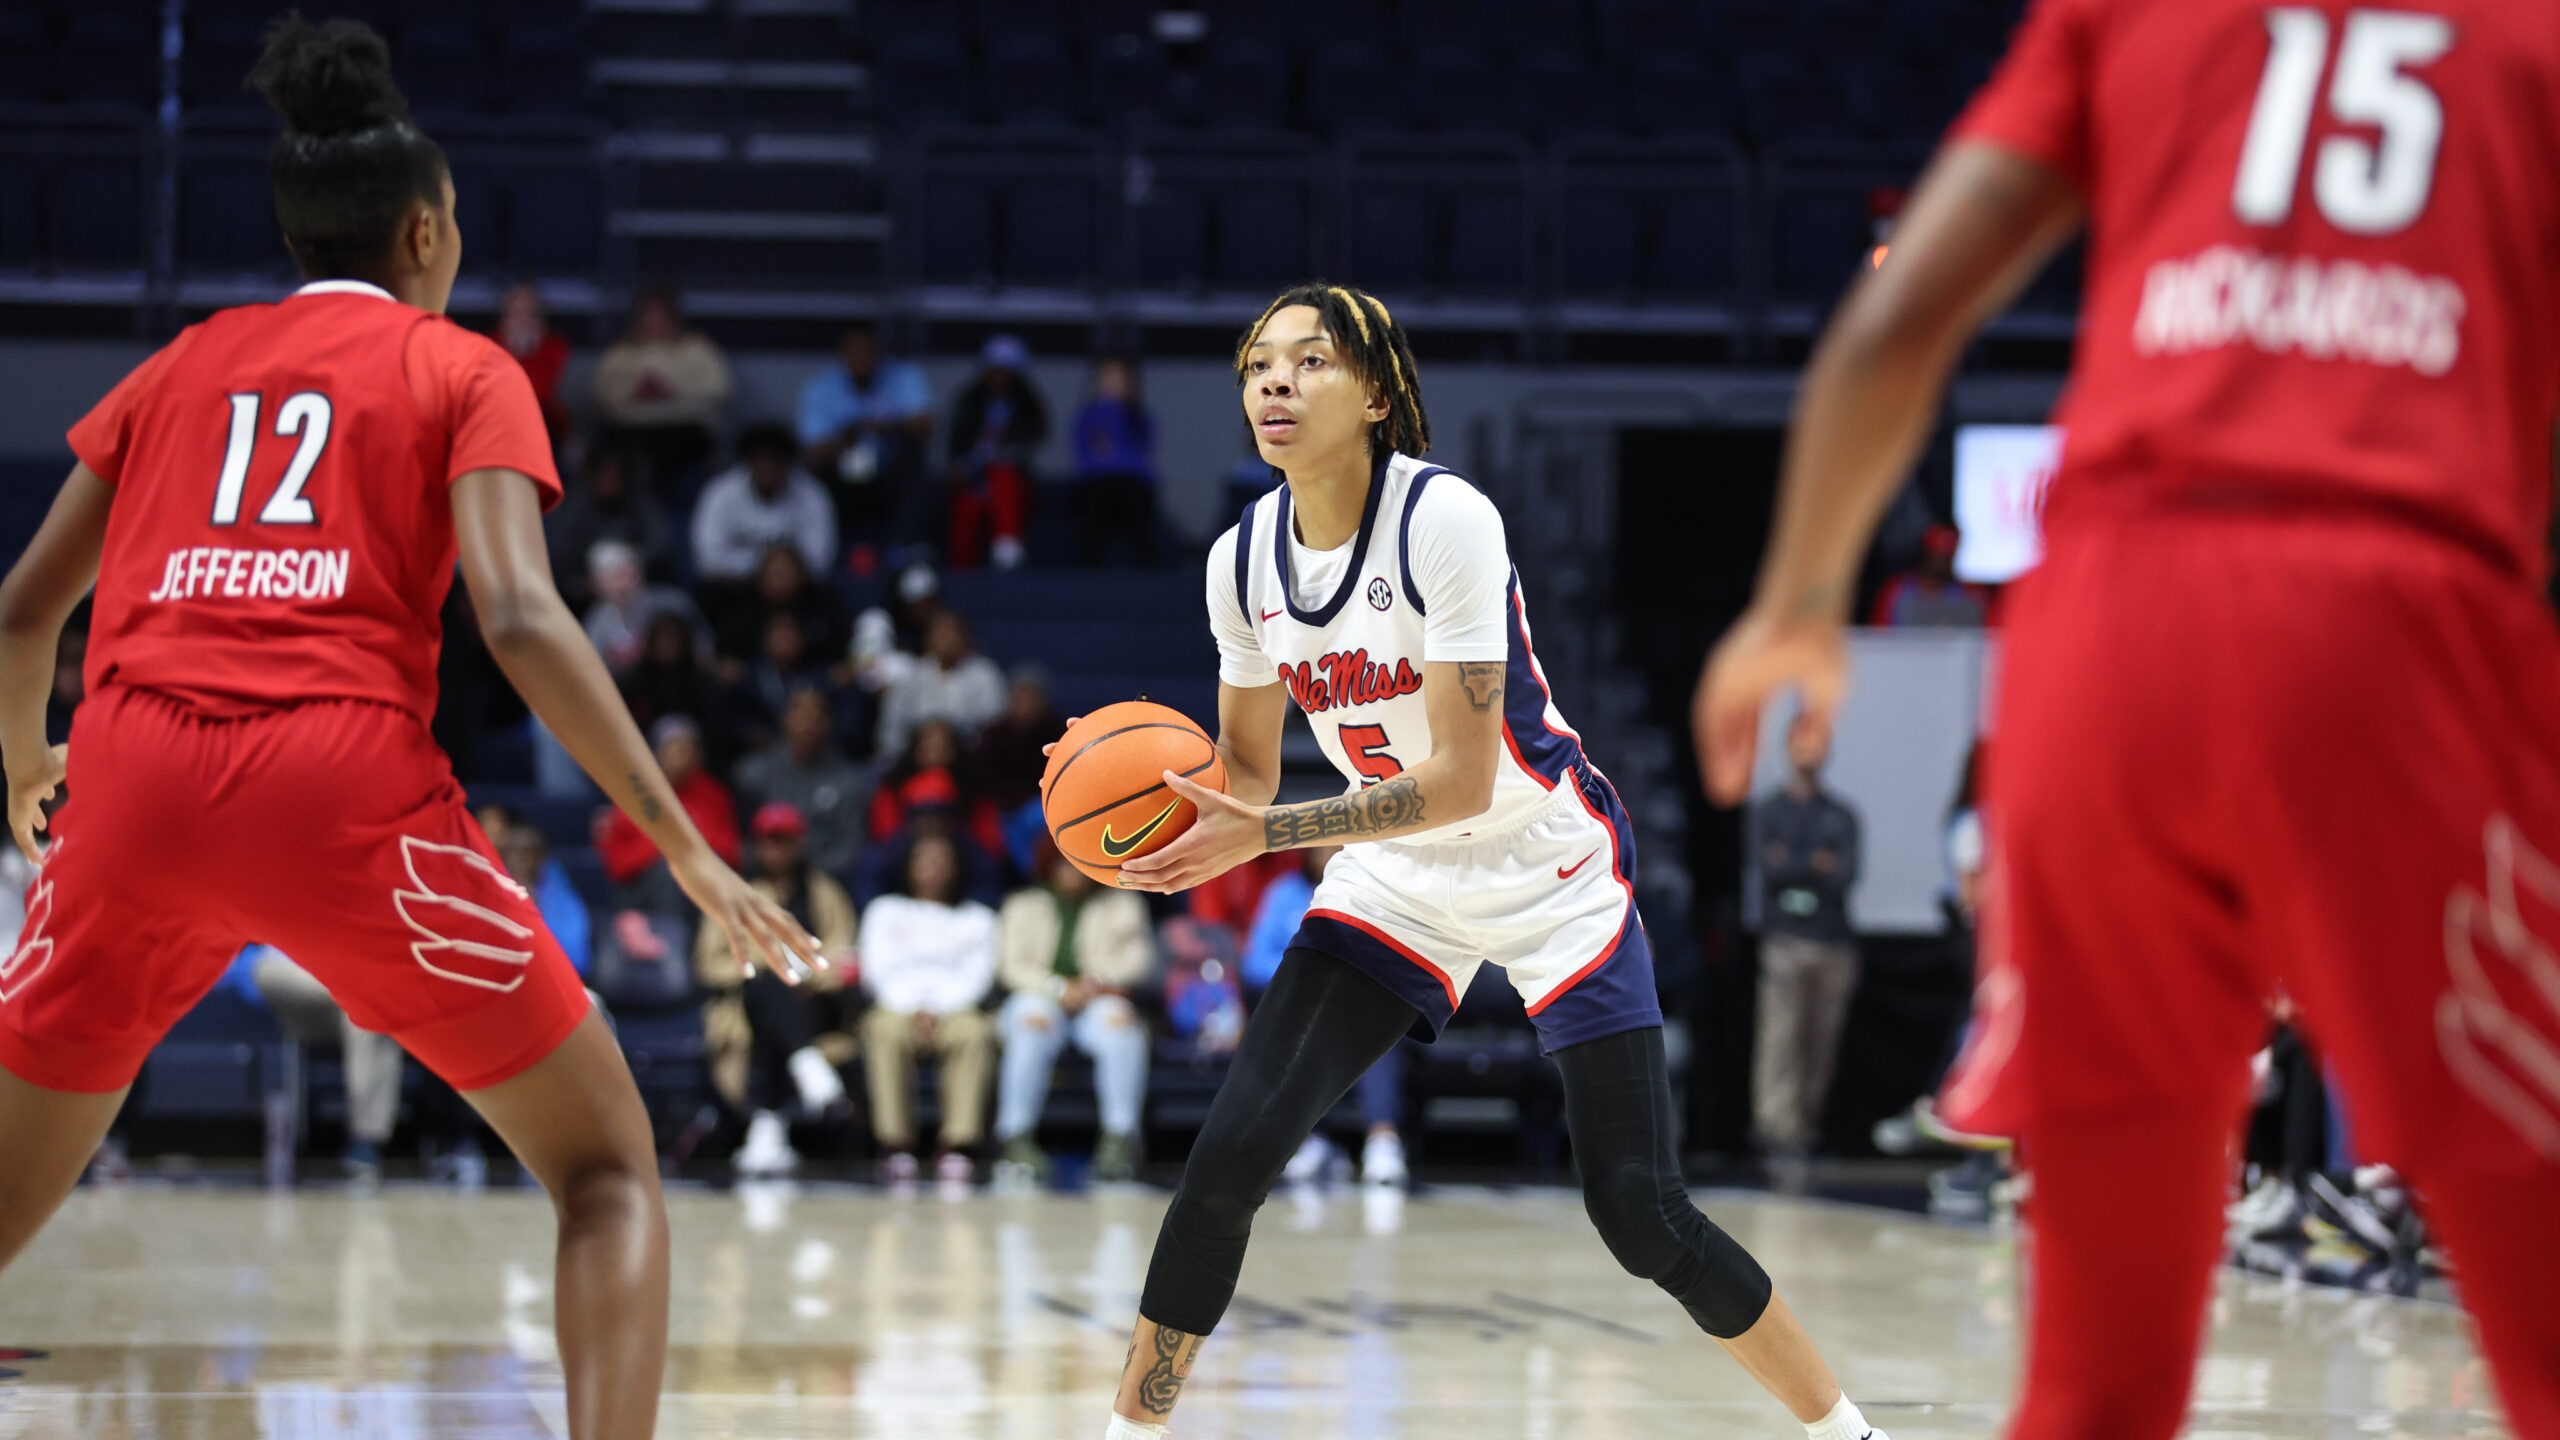 Ole Miss women’s basketball team faces second defeat of the season